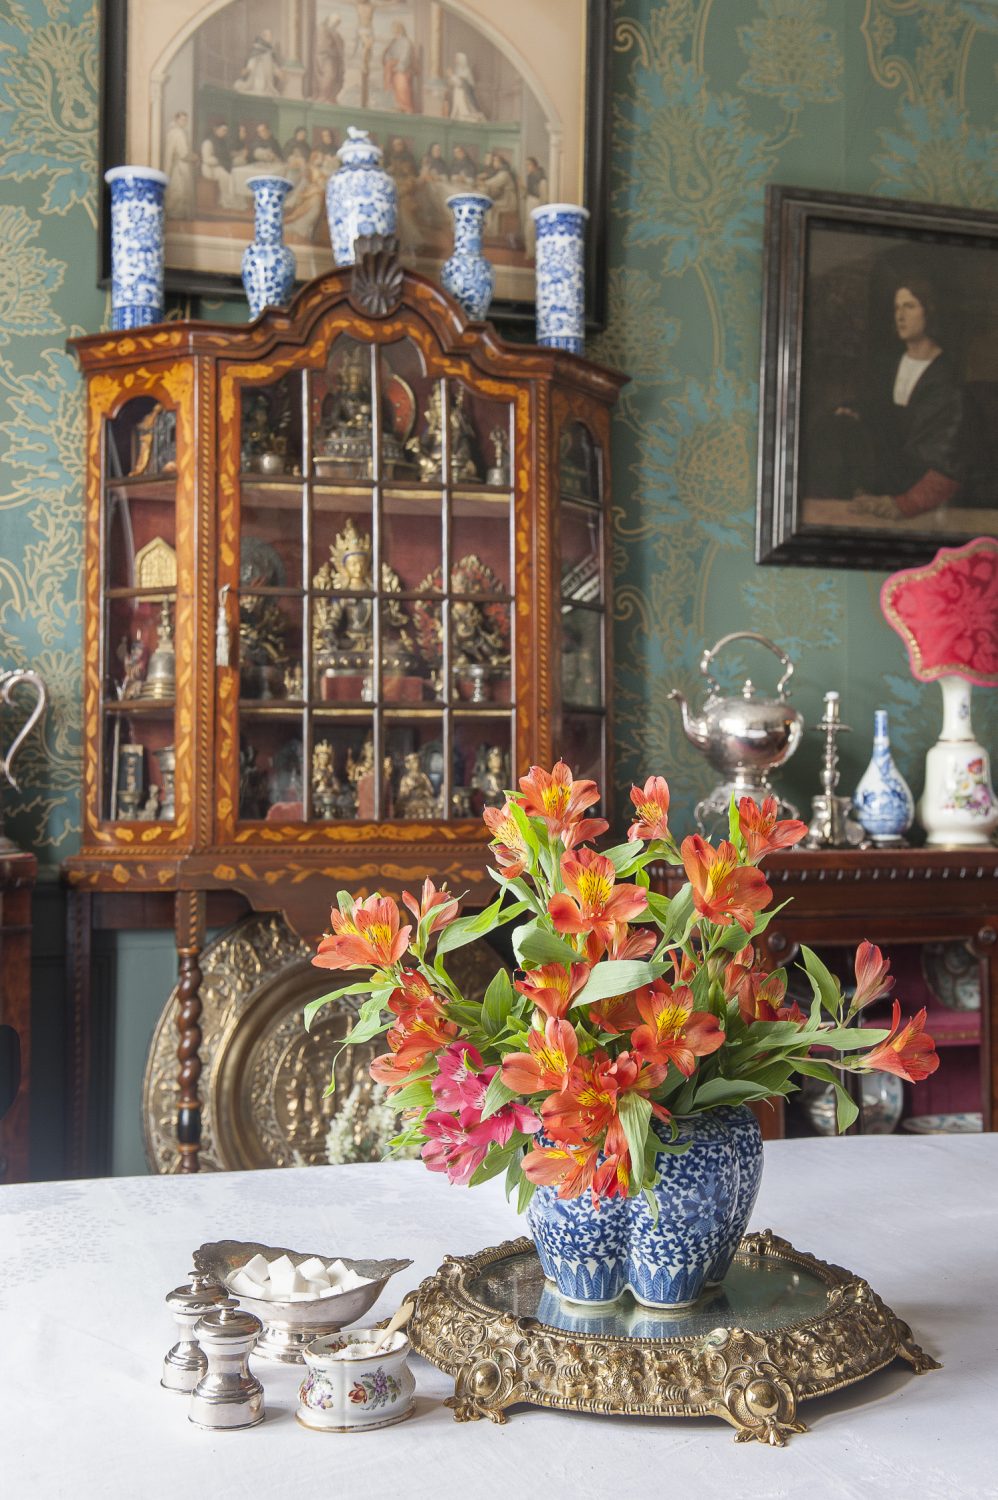 Part of the St. Benedict experience is breakfast in the dining room just across the hall from the drawing room, resplendent with green and gold Watts of Westminster wallpaper and a crystal chandelier, served in silver chafing dishes in the English country house manner